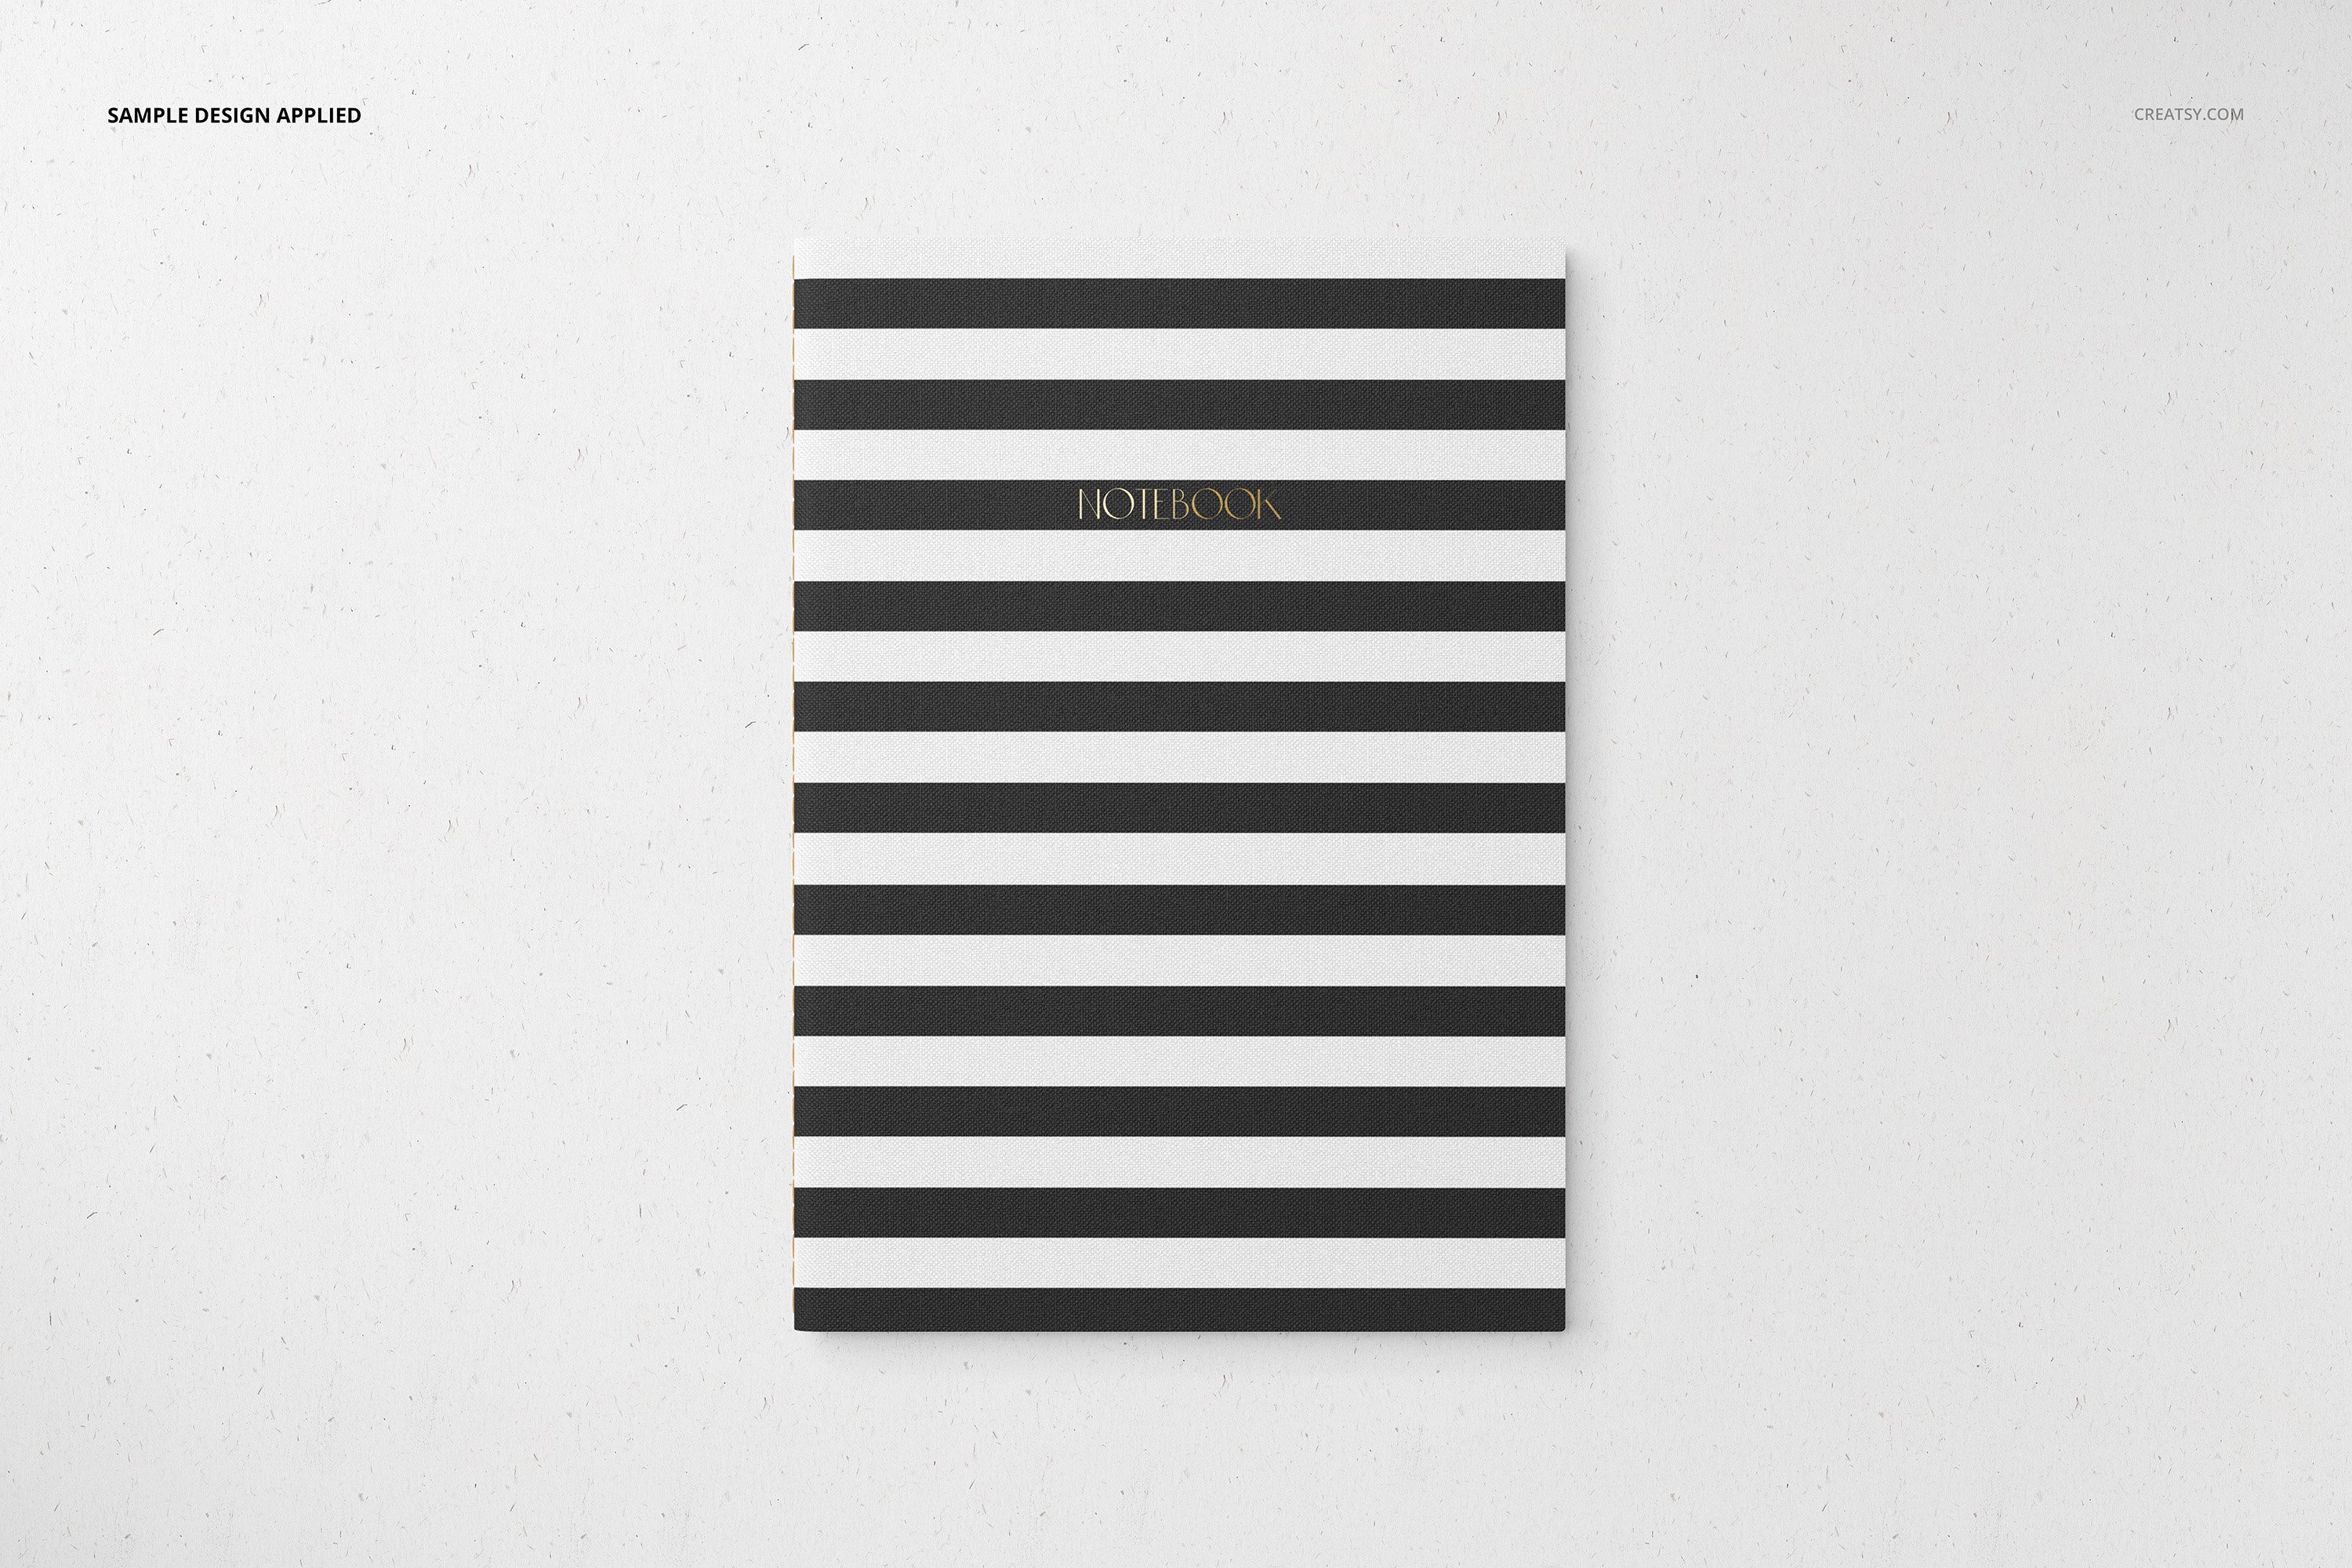 Classic notebook in the black horizontal lines and with the gold font.